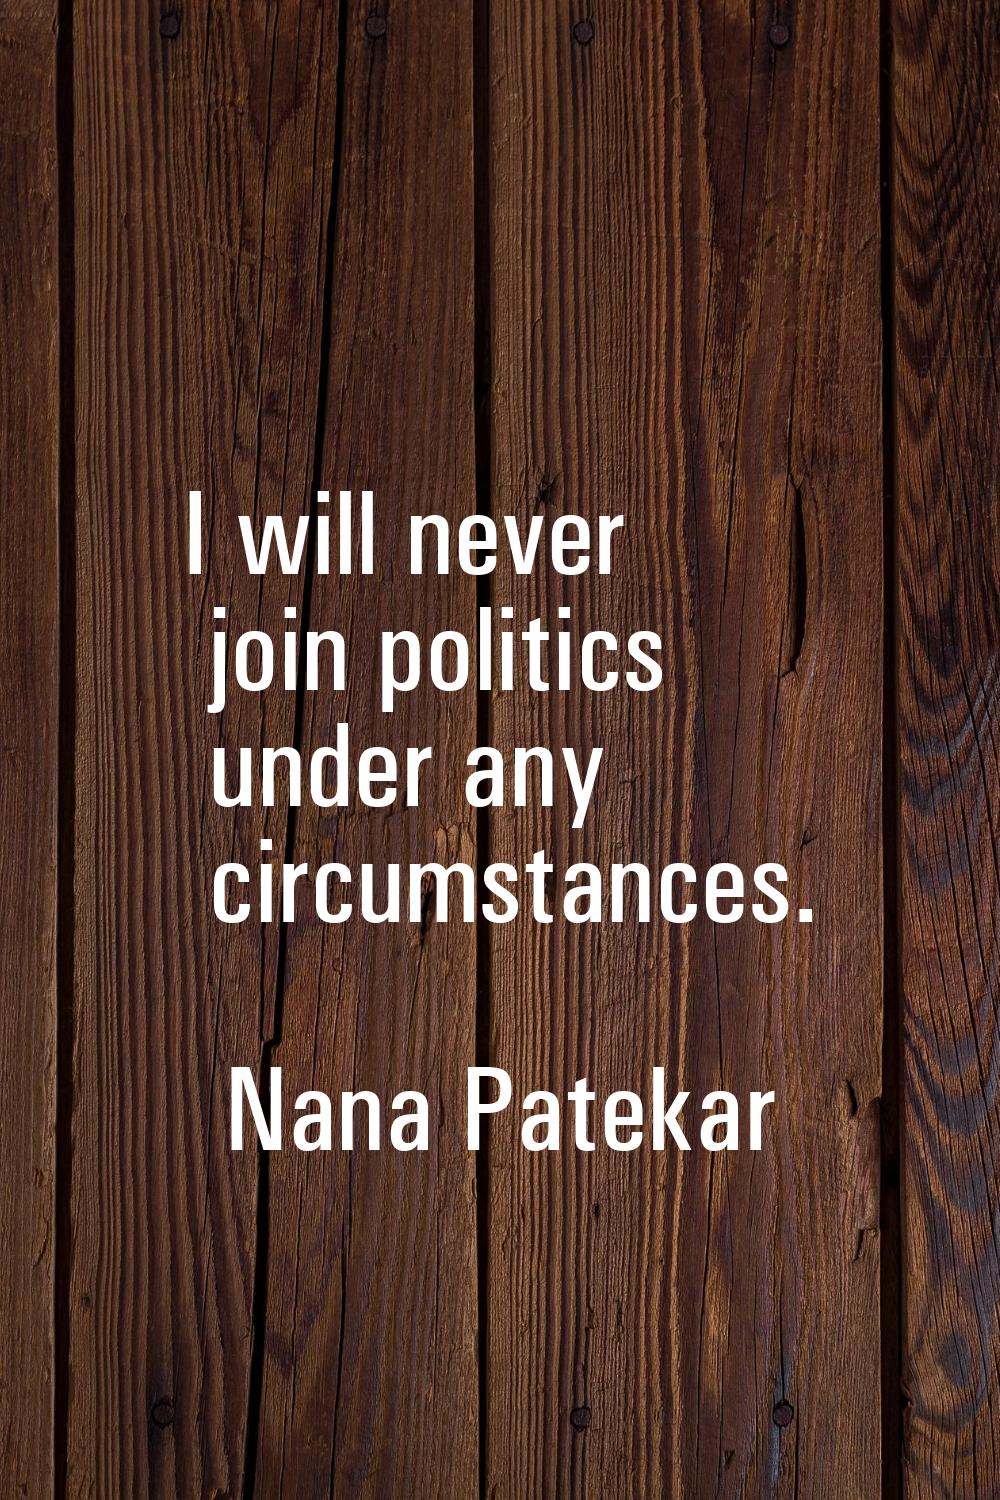 I will never join politics under any circumstances.